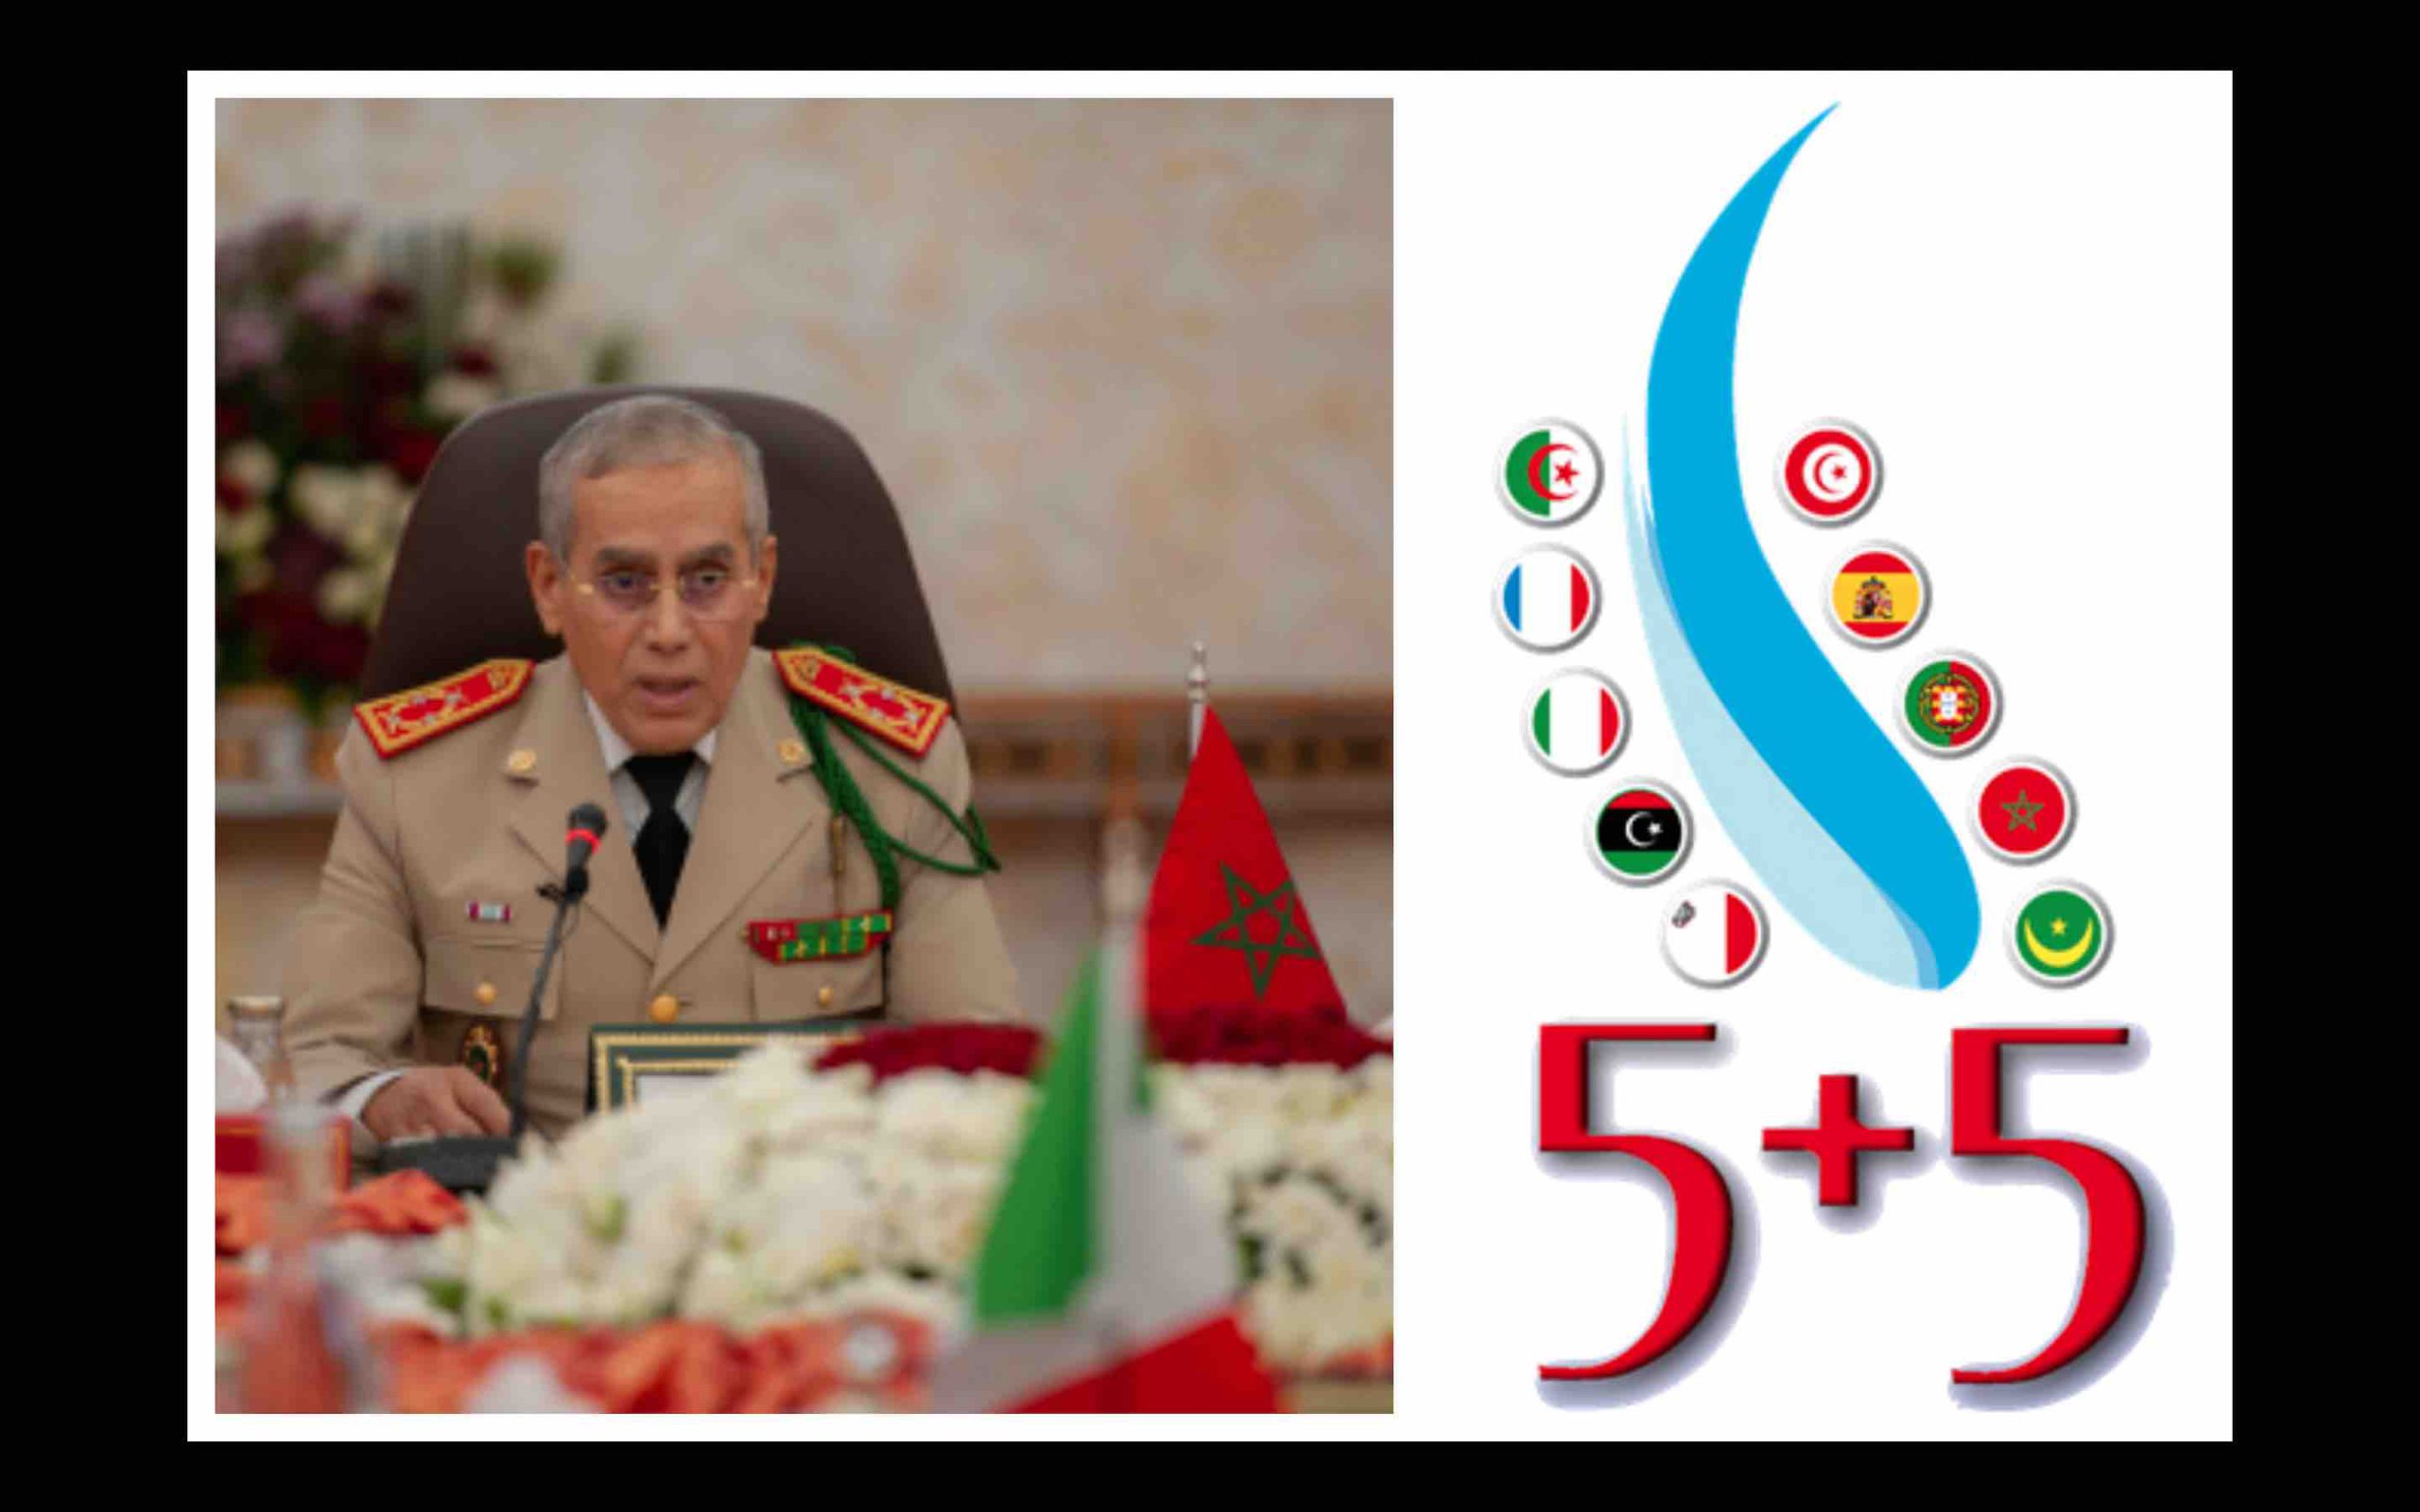 5+5 Defense Initiative: Steering Committee meets in Morocco ahead of Defense Ministers gathering